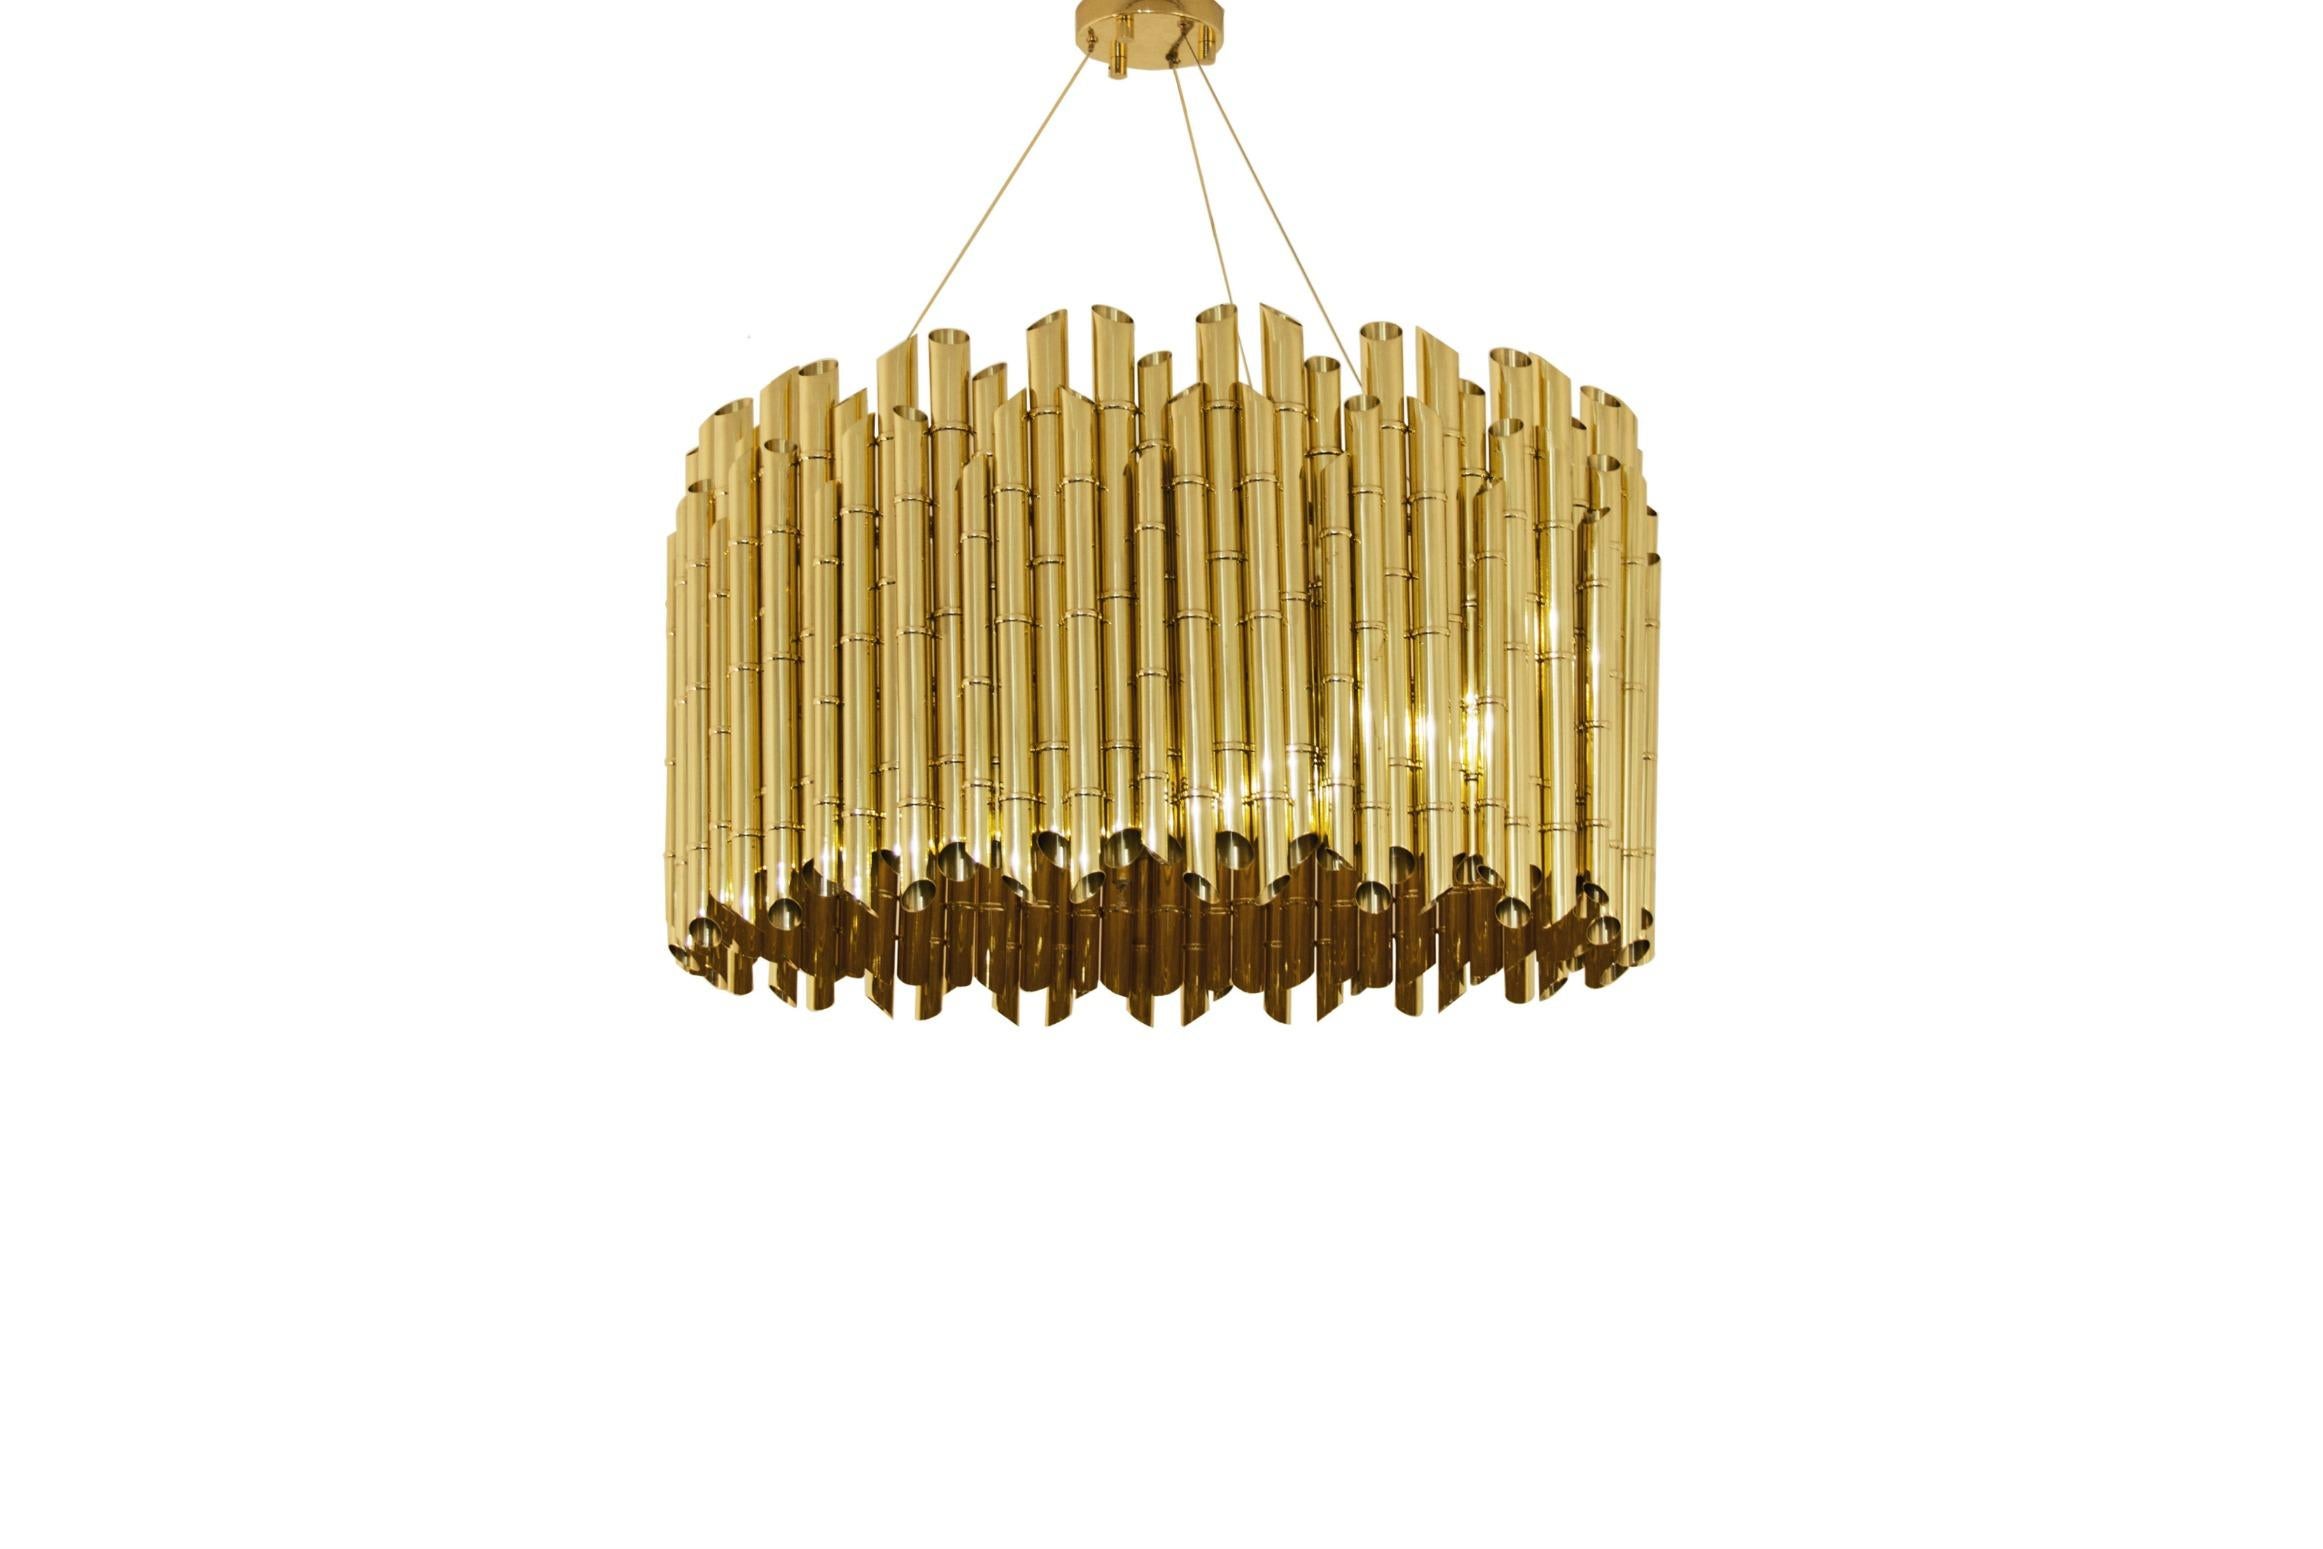 Located in Japan, Sakishima Islands are part of Ryukyu Islands chain. Saki suspension light is a tribute to this unforgettable island group. This glossy brass chandelier is a remarkable lighting piece that will create a warm and cozy modern interior